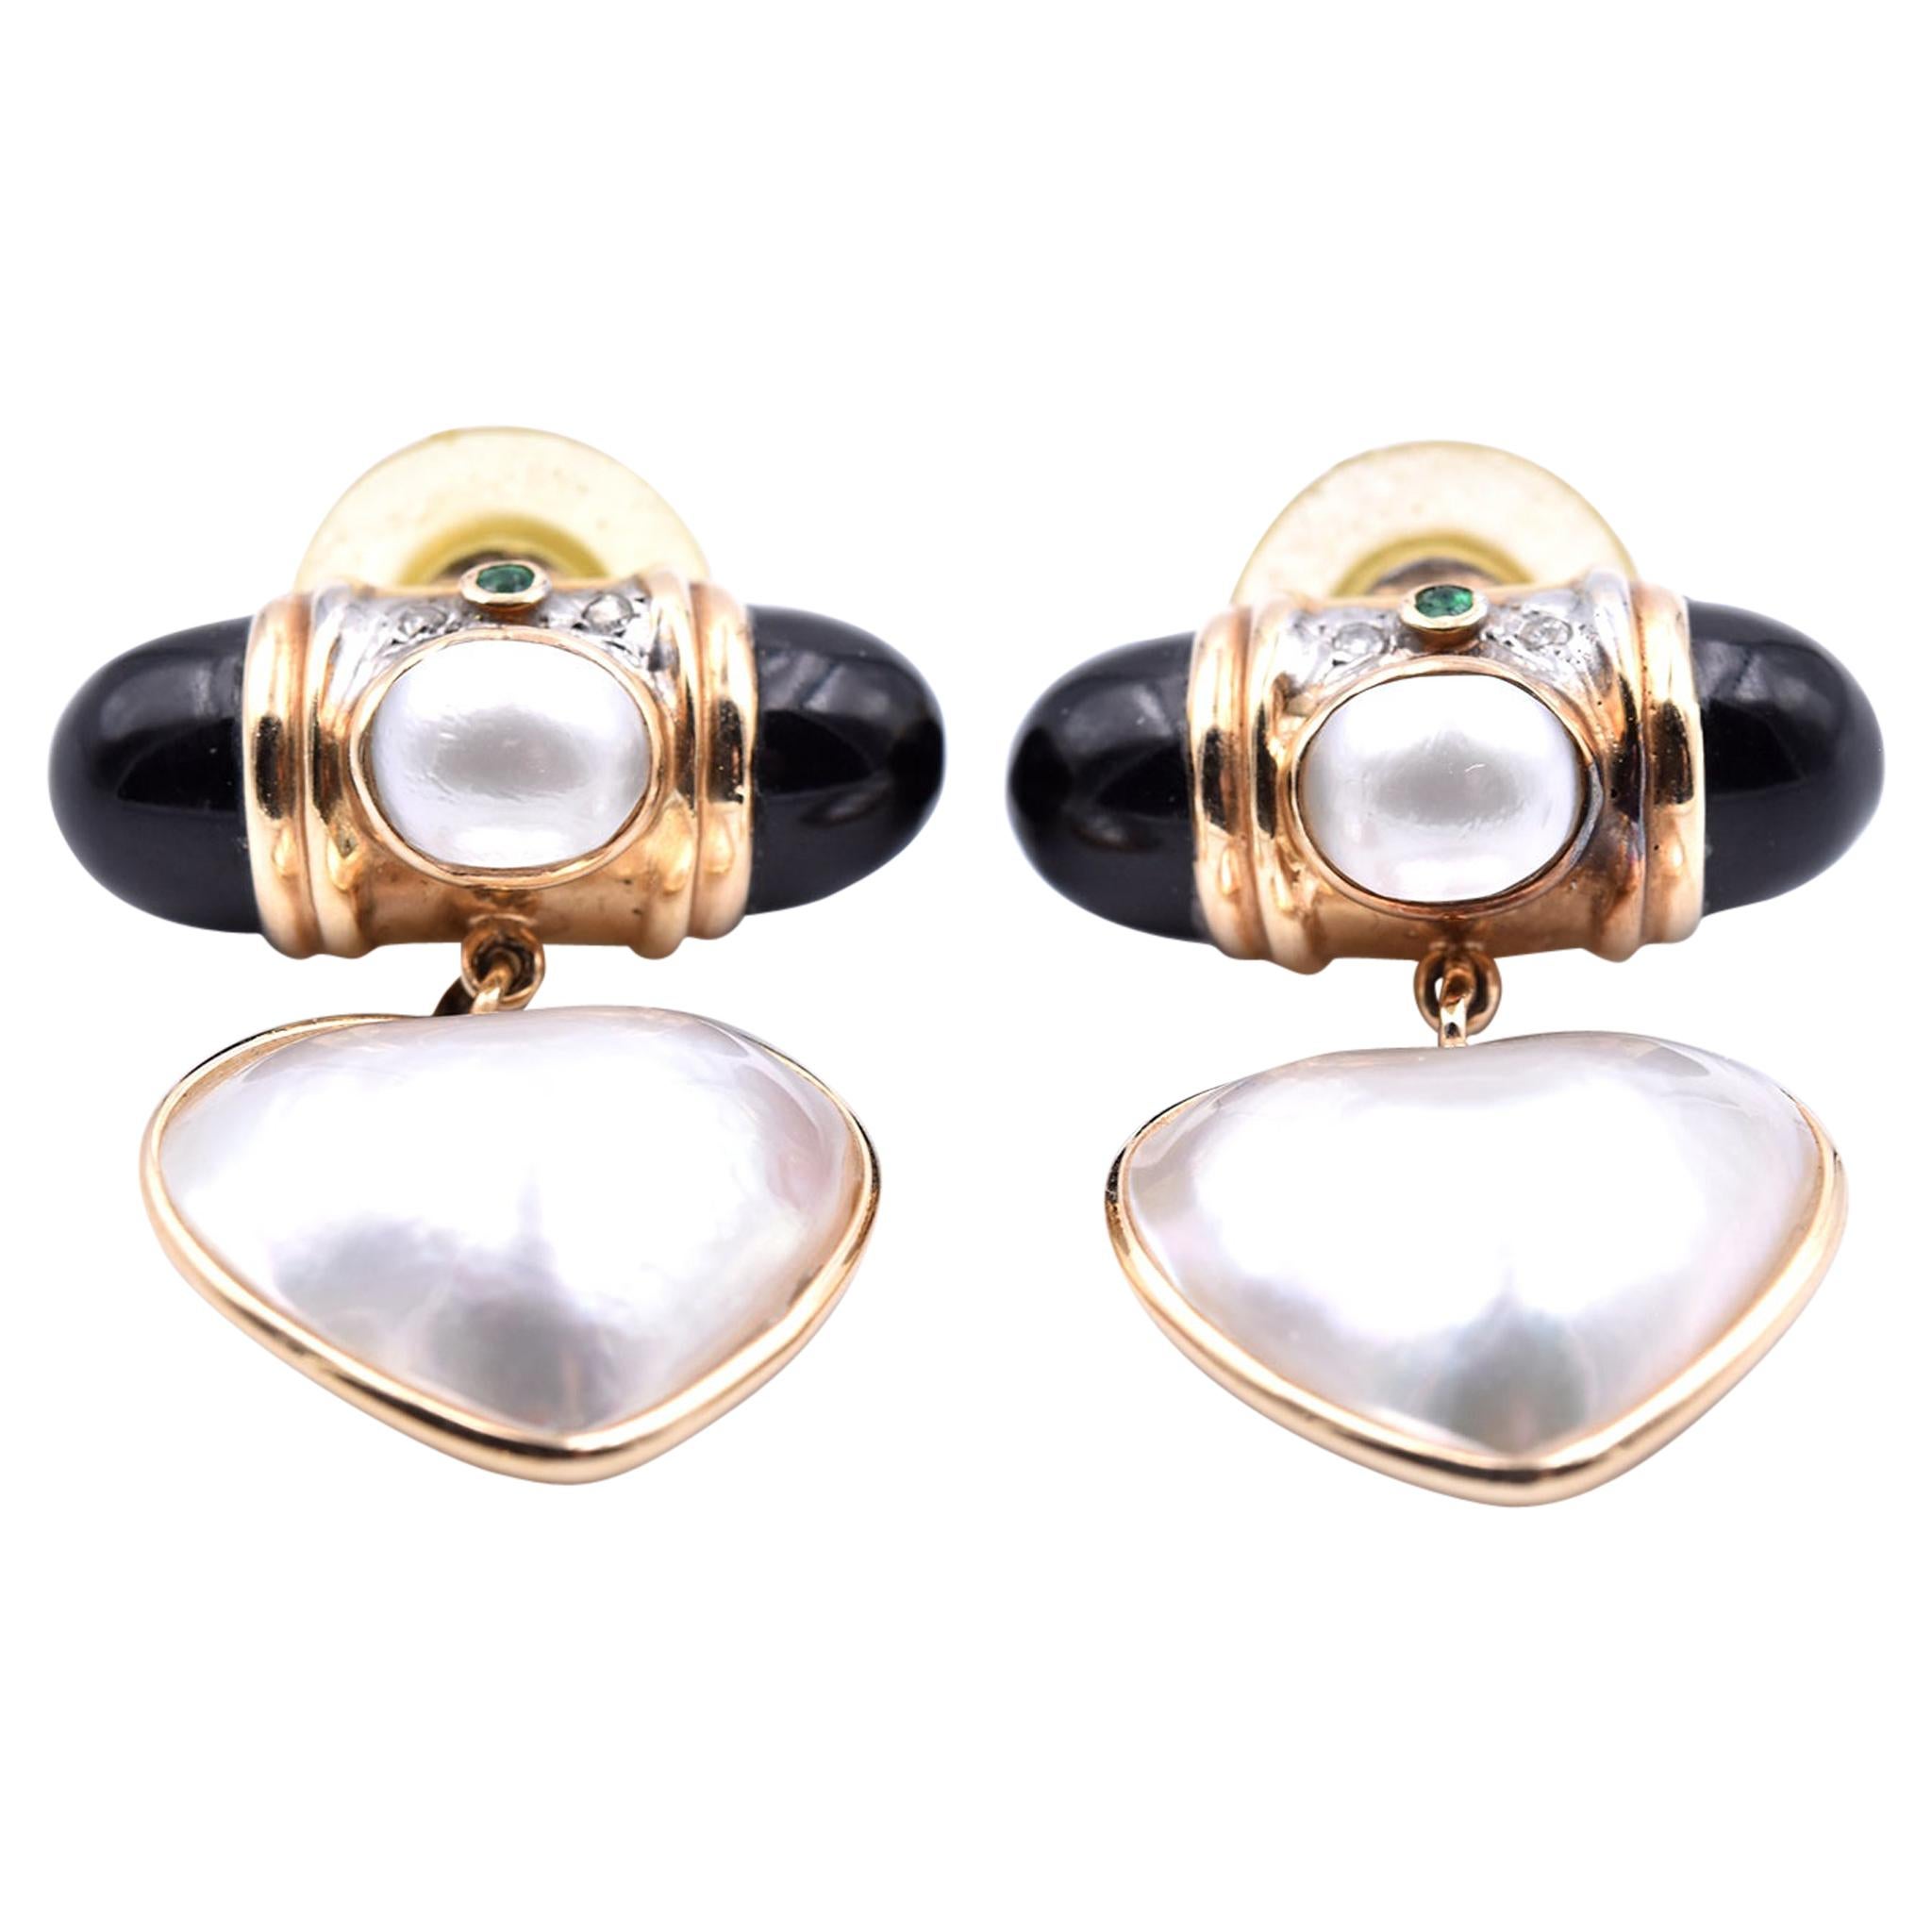 14 Karat Yellow Gold Mabe Pearl Earrings with Onyx, Emerald, and Diamond